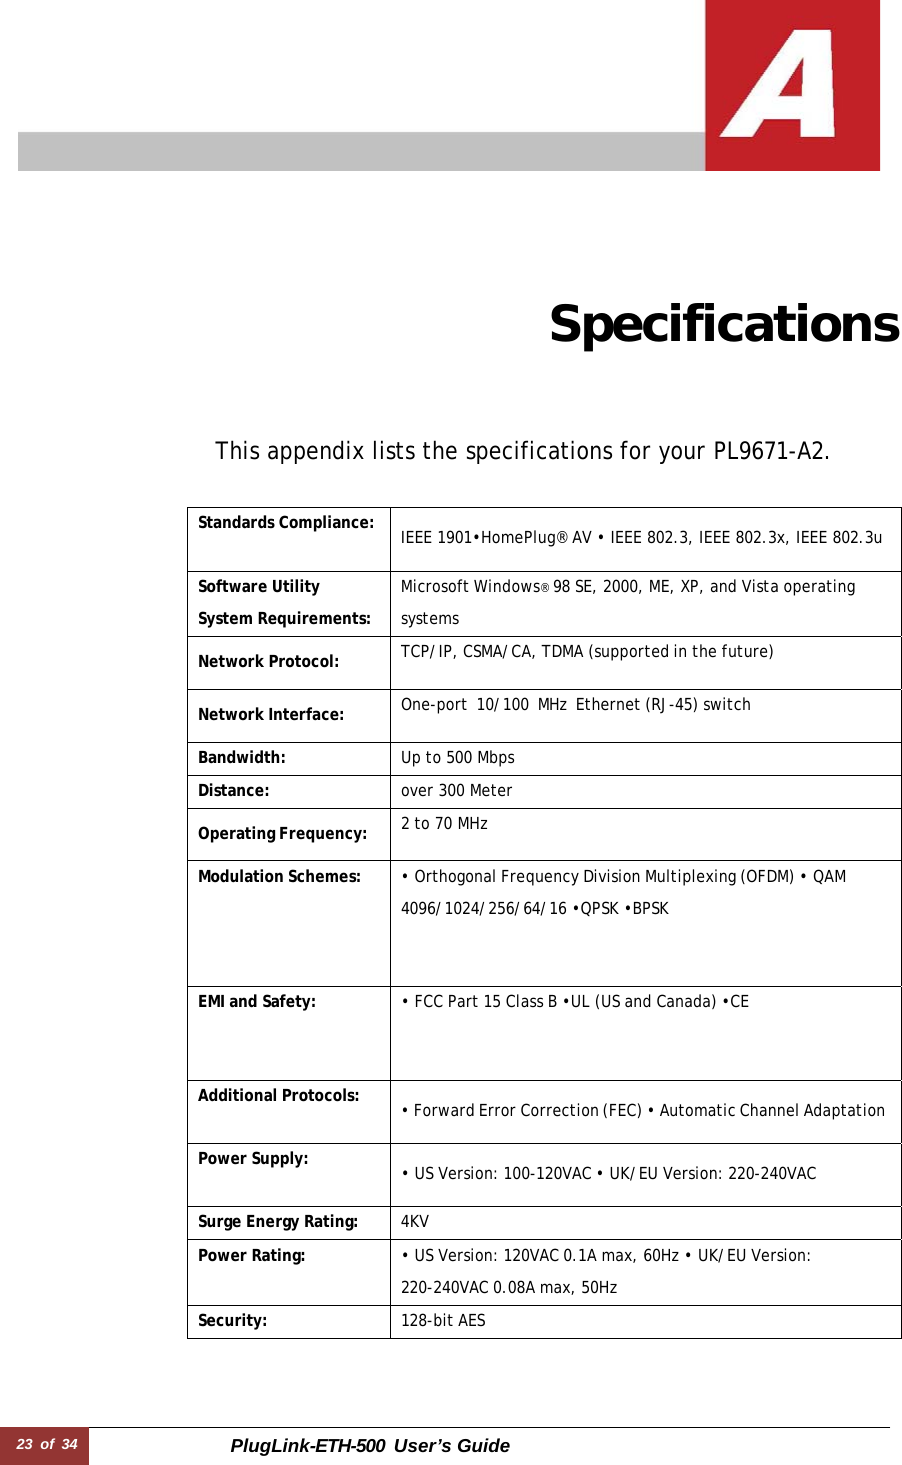 23 of 34 PlugLink-ETH-500  User’s Guide                Specifications     This appendix lists the specifications for your PL9671-A2.   Standards Compliance: IEEE 1901•HomePlug® AV • IEEE 802.3, IEEE 802.3x, IEEE 802.3uSoftware Utility  System Requirements:Microsoft Windows® 98 SE, 2000, ME, XP, and Vista operating  systems  Network Protocol: TCP/IP, CSMA/CA, TDMA (supported in the future)  Network Interface: One-port  10/100  MHz  Ethernet (RJ-45) switch Bandwidth: Up to 500 MbpsDistance: over 300 Meter Operating Frequency: 2 to 70 MHzModulation Schemes: • Orthogonal Frequency Division Multiplexing (OFDM) • QAM  4096/1024/256/64/16 •QPSK •BPSK EMI and Safety: • FCC Part 15 Class B •UL (US and Canada) •CE Additional Protocols: • Forward Error Correction (FEC) • Automatic Channel AdaptationPower Supply: • US Version: 100-120VAC • UK/EU Version: 220-240VAC Surge Energy Rating: 4KVPower Rating: • US Version: 120VAC 0.1A max, 60Hz • UK/EU Version:  220-240VAC 0.08A max, 50Hz Security: 128-bit AES